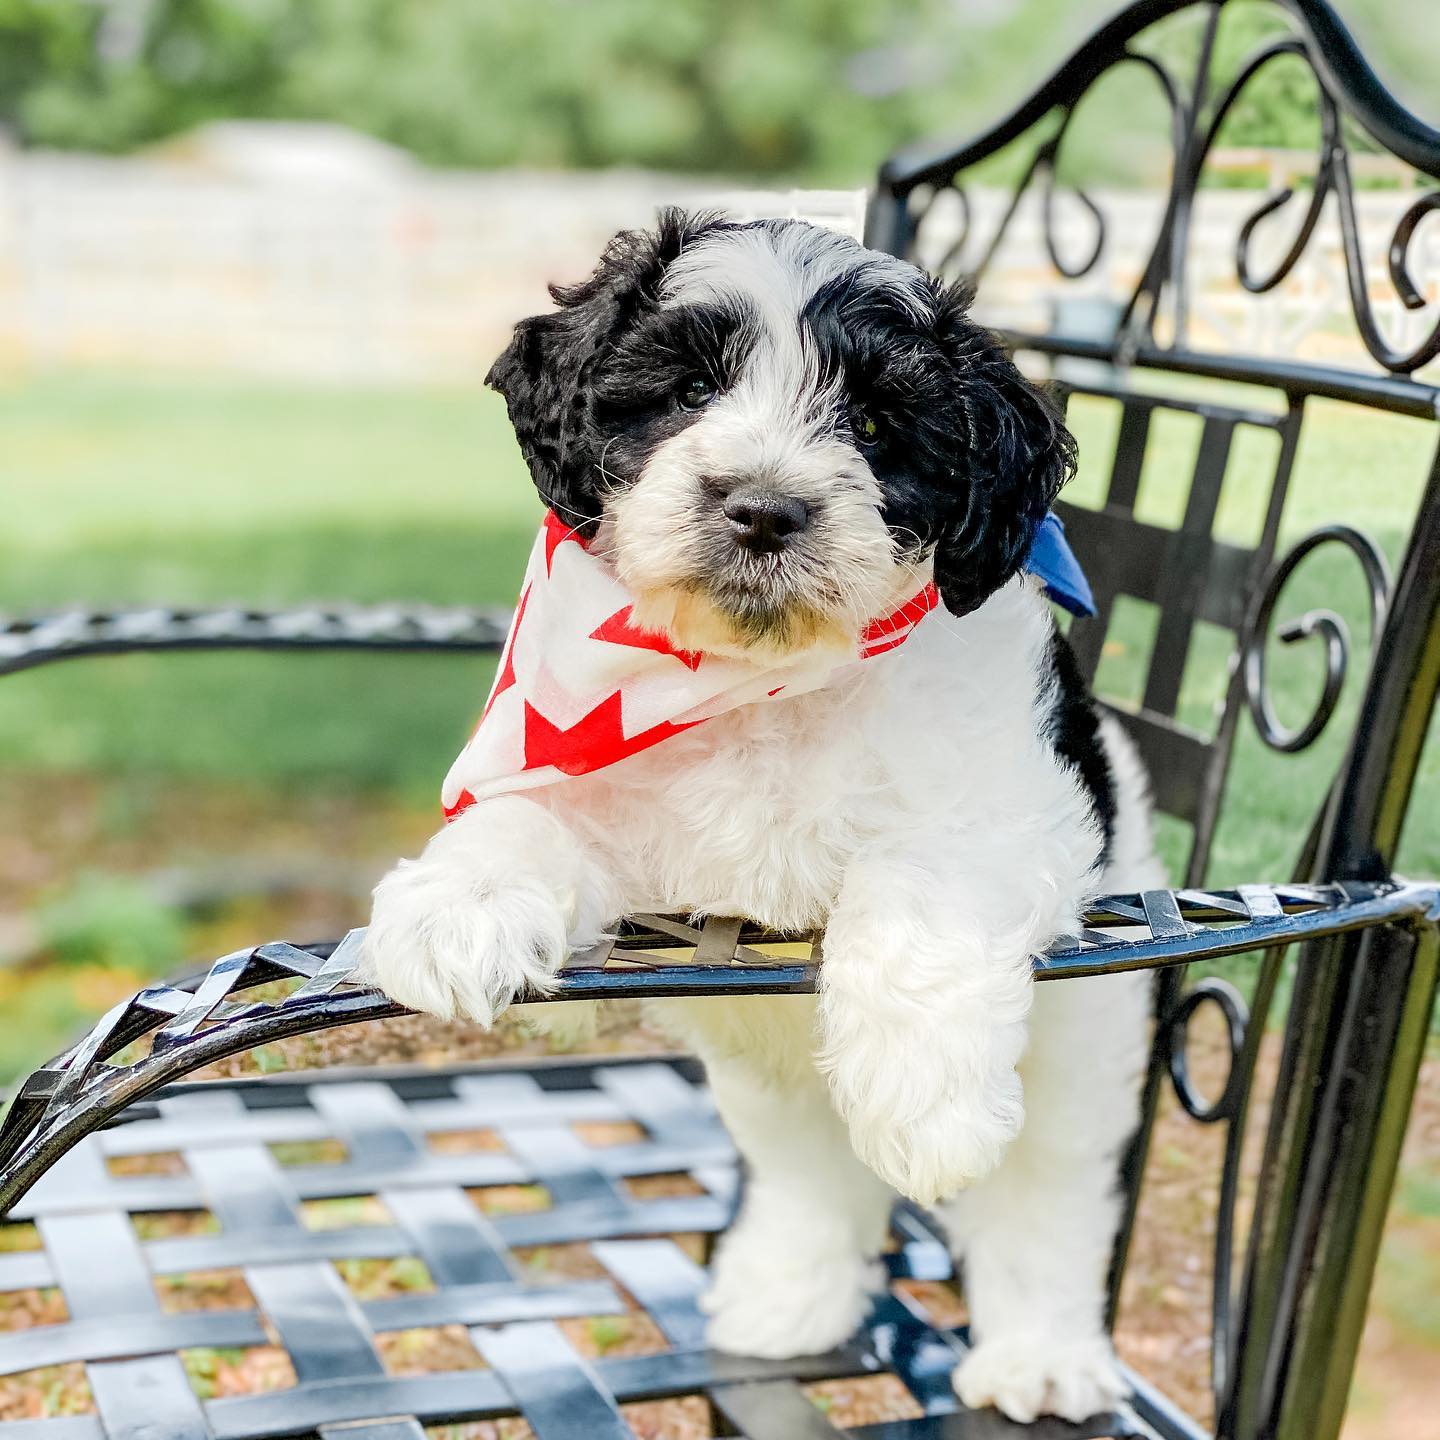 Parti color goldendoodles are beautiful dogs that are black and white. They are a mix of a golden retriever and a poodle, and they are often very friendly and good with children. They make great pets!